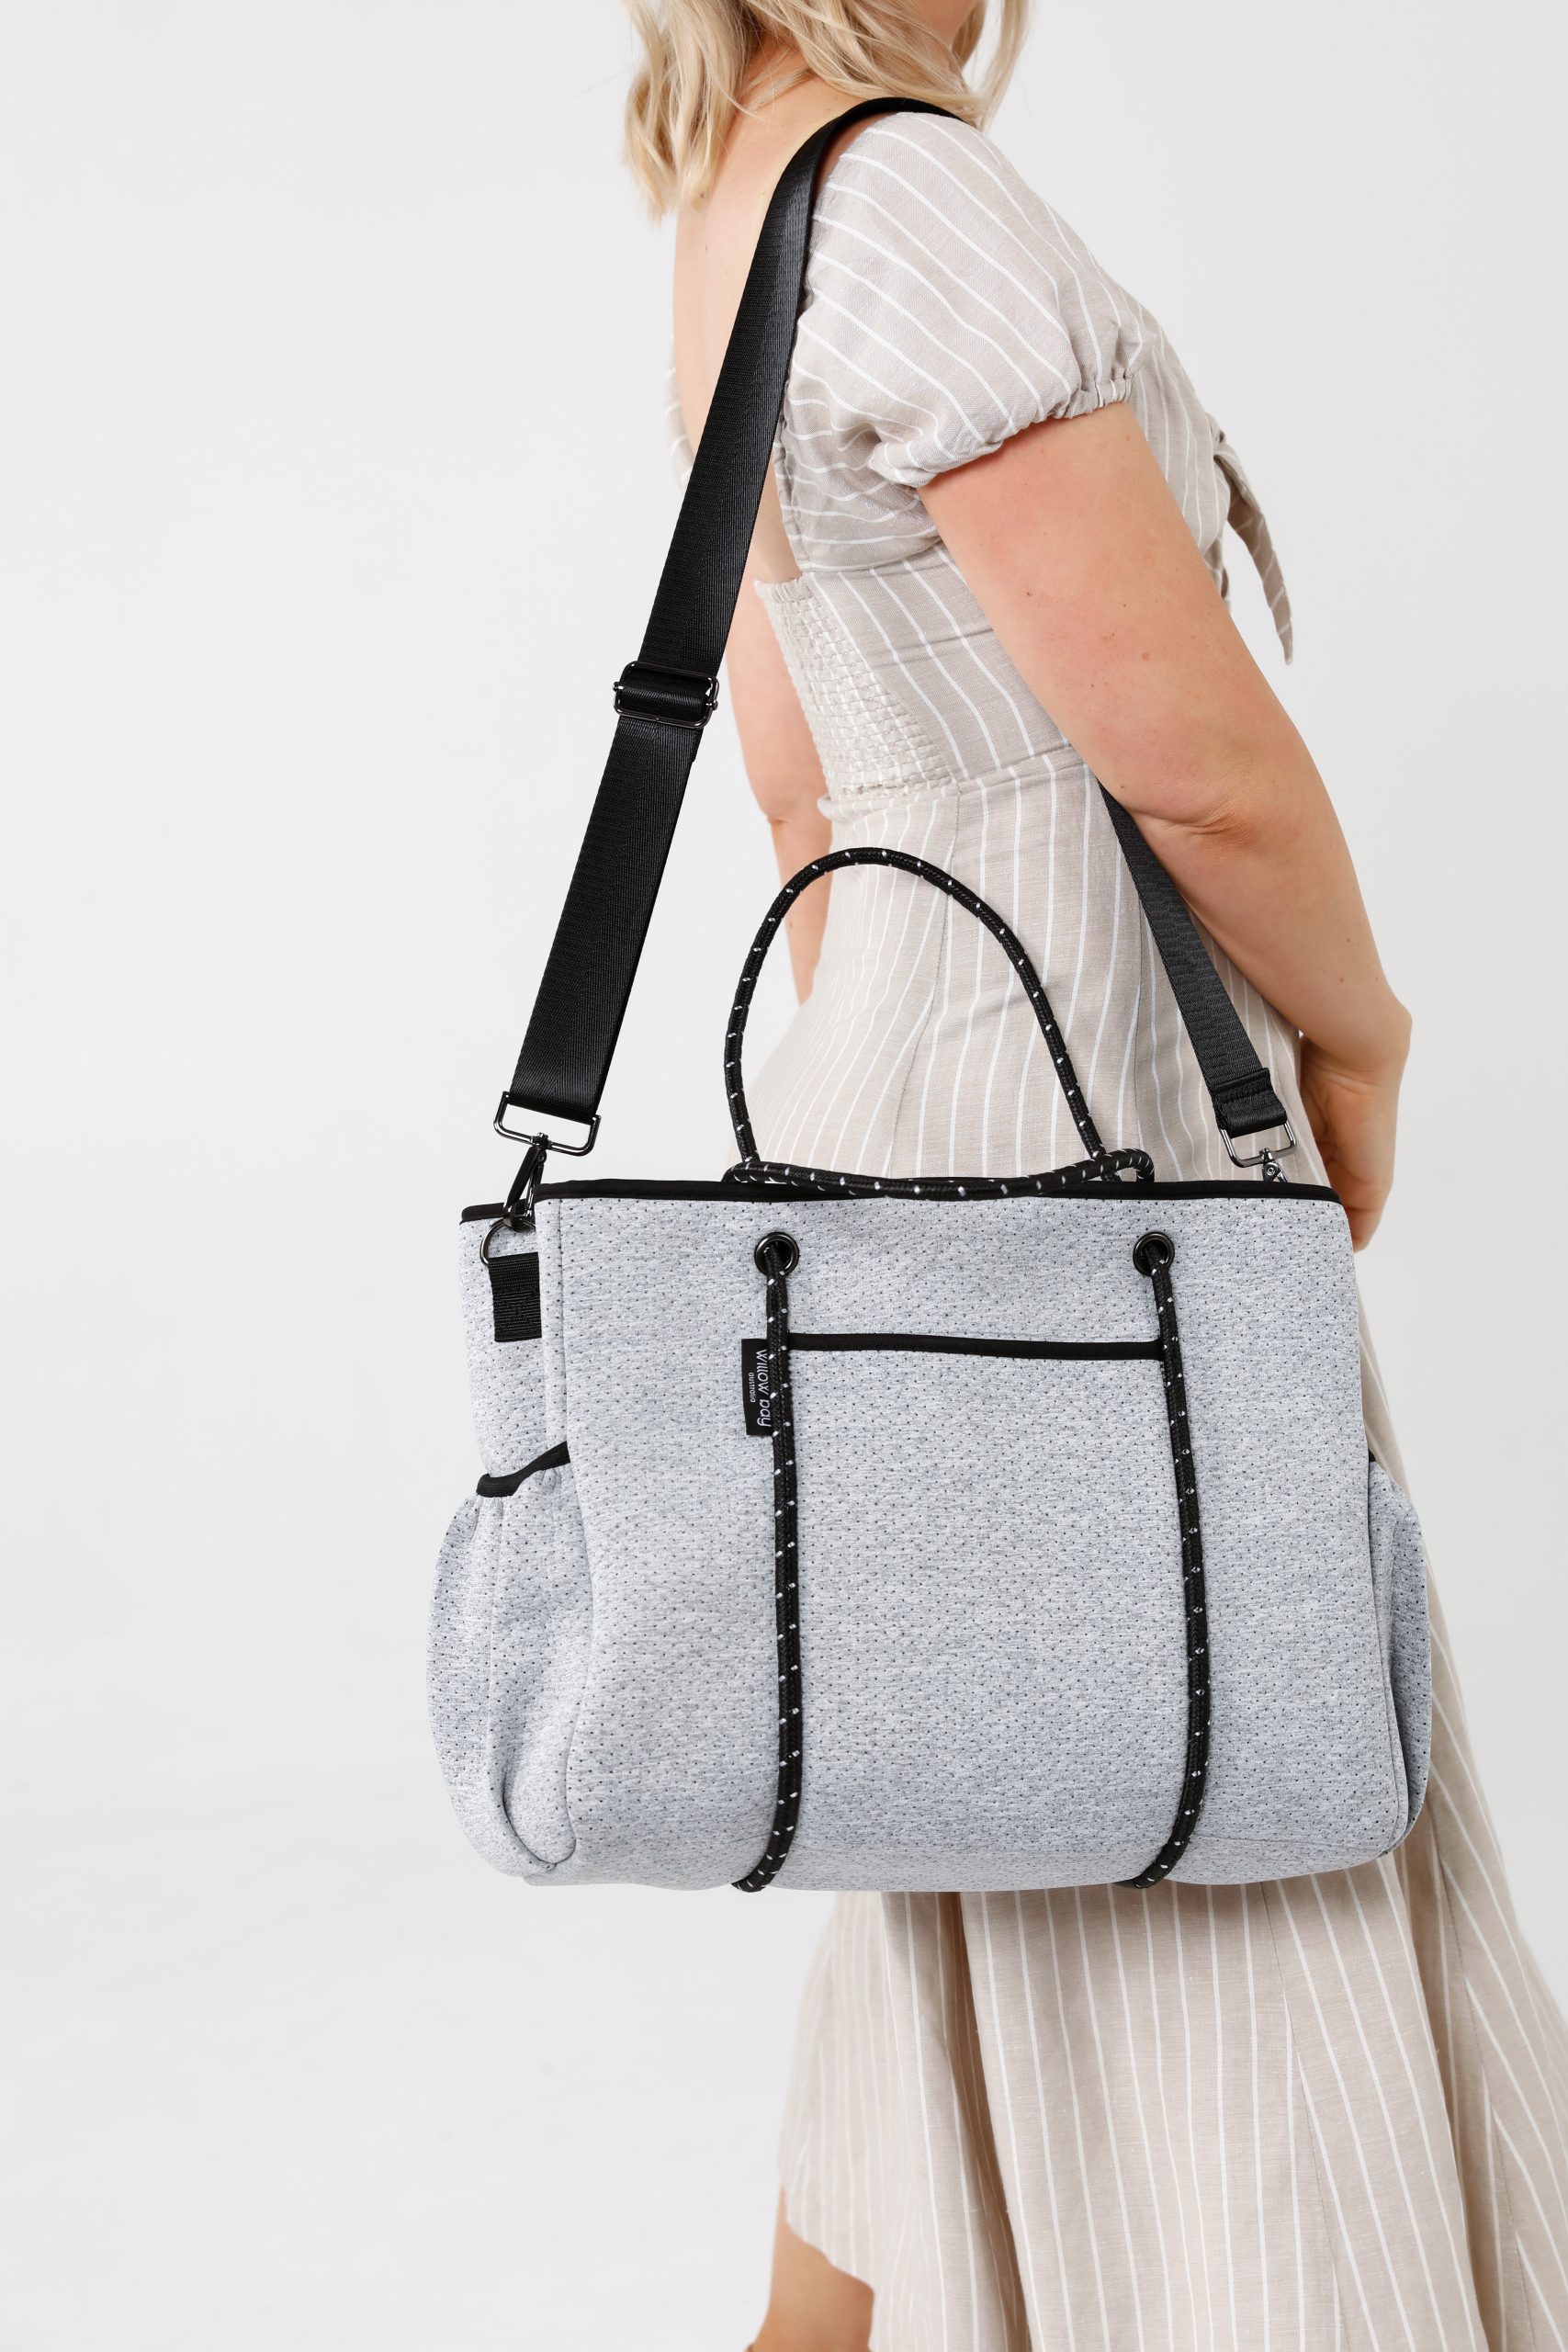 WIN a Willow Bay Australia Metro Tote for you and your bestie